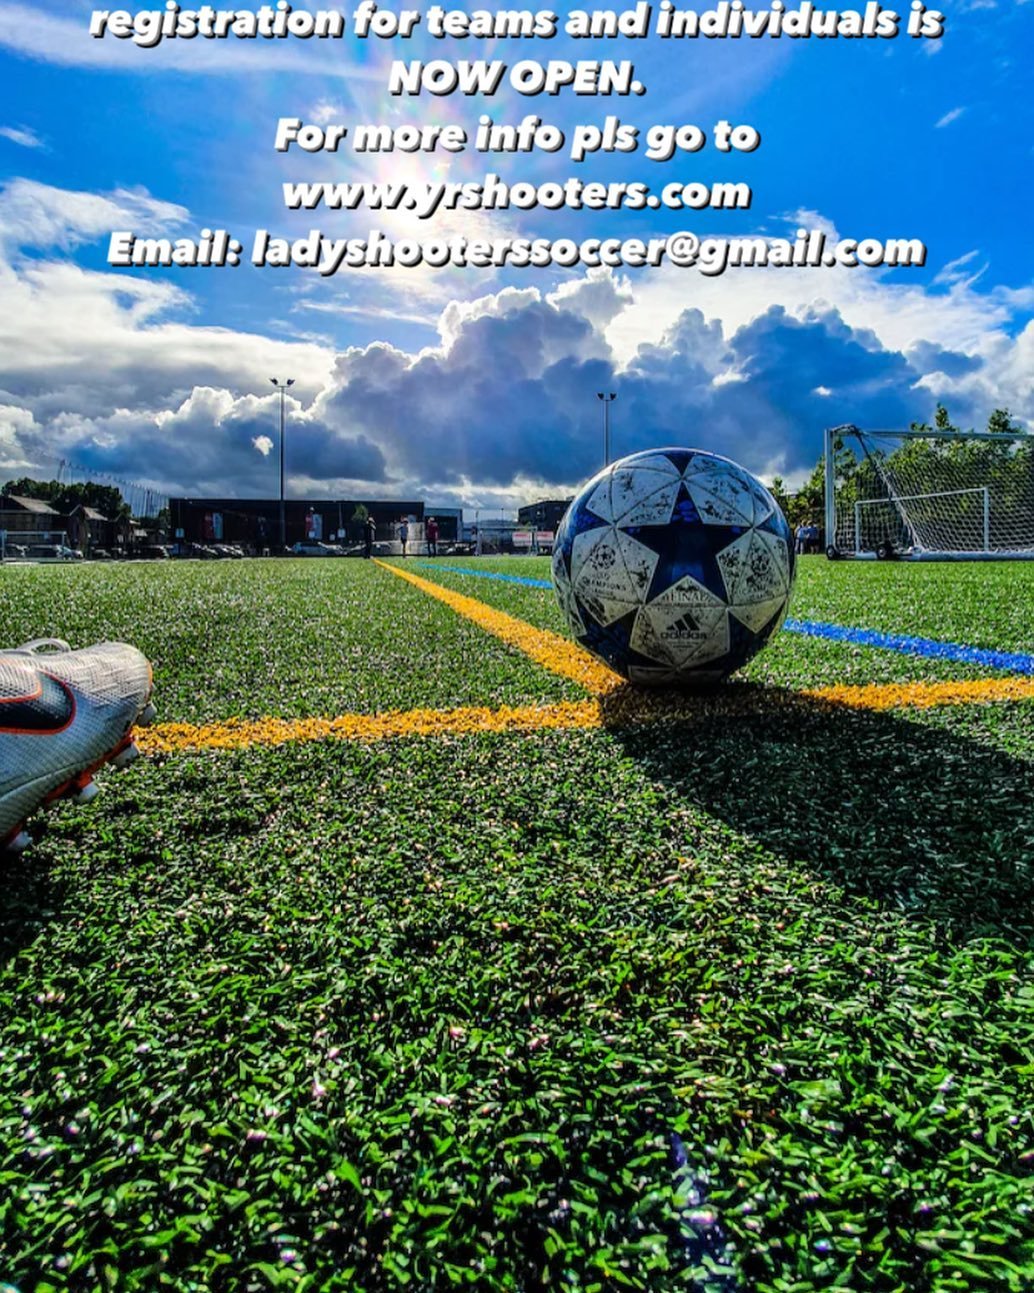 Only 2 outdoor team spots remaining. Lady Shooters Soccer league, Vaughan18 + yrs. Team and individuals all welcome, Tuesdays @ Adidas Sports Complex and Concord Sports Complex #. To register pls go to www.yrshooters.com or email ladyshooterssoccer@g